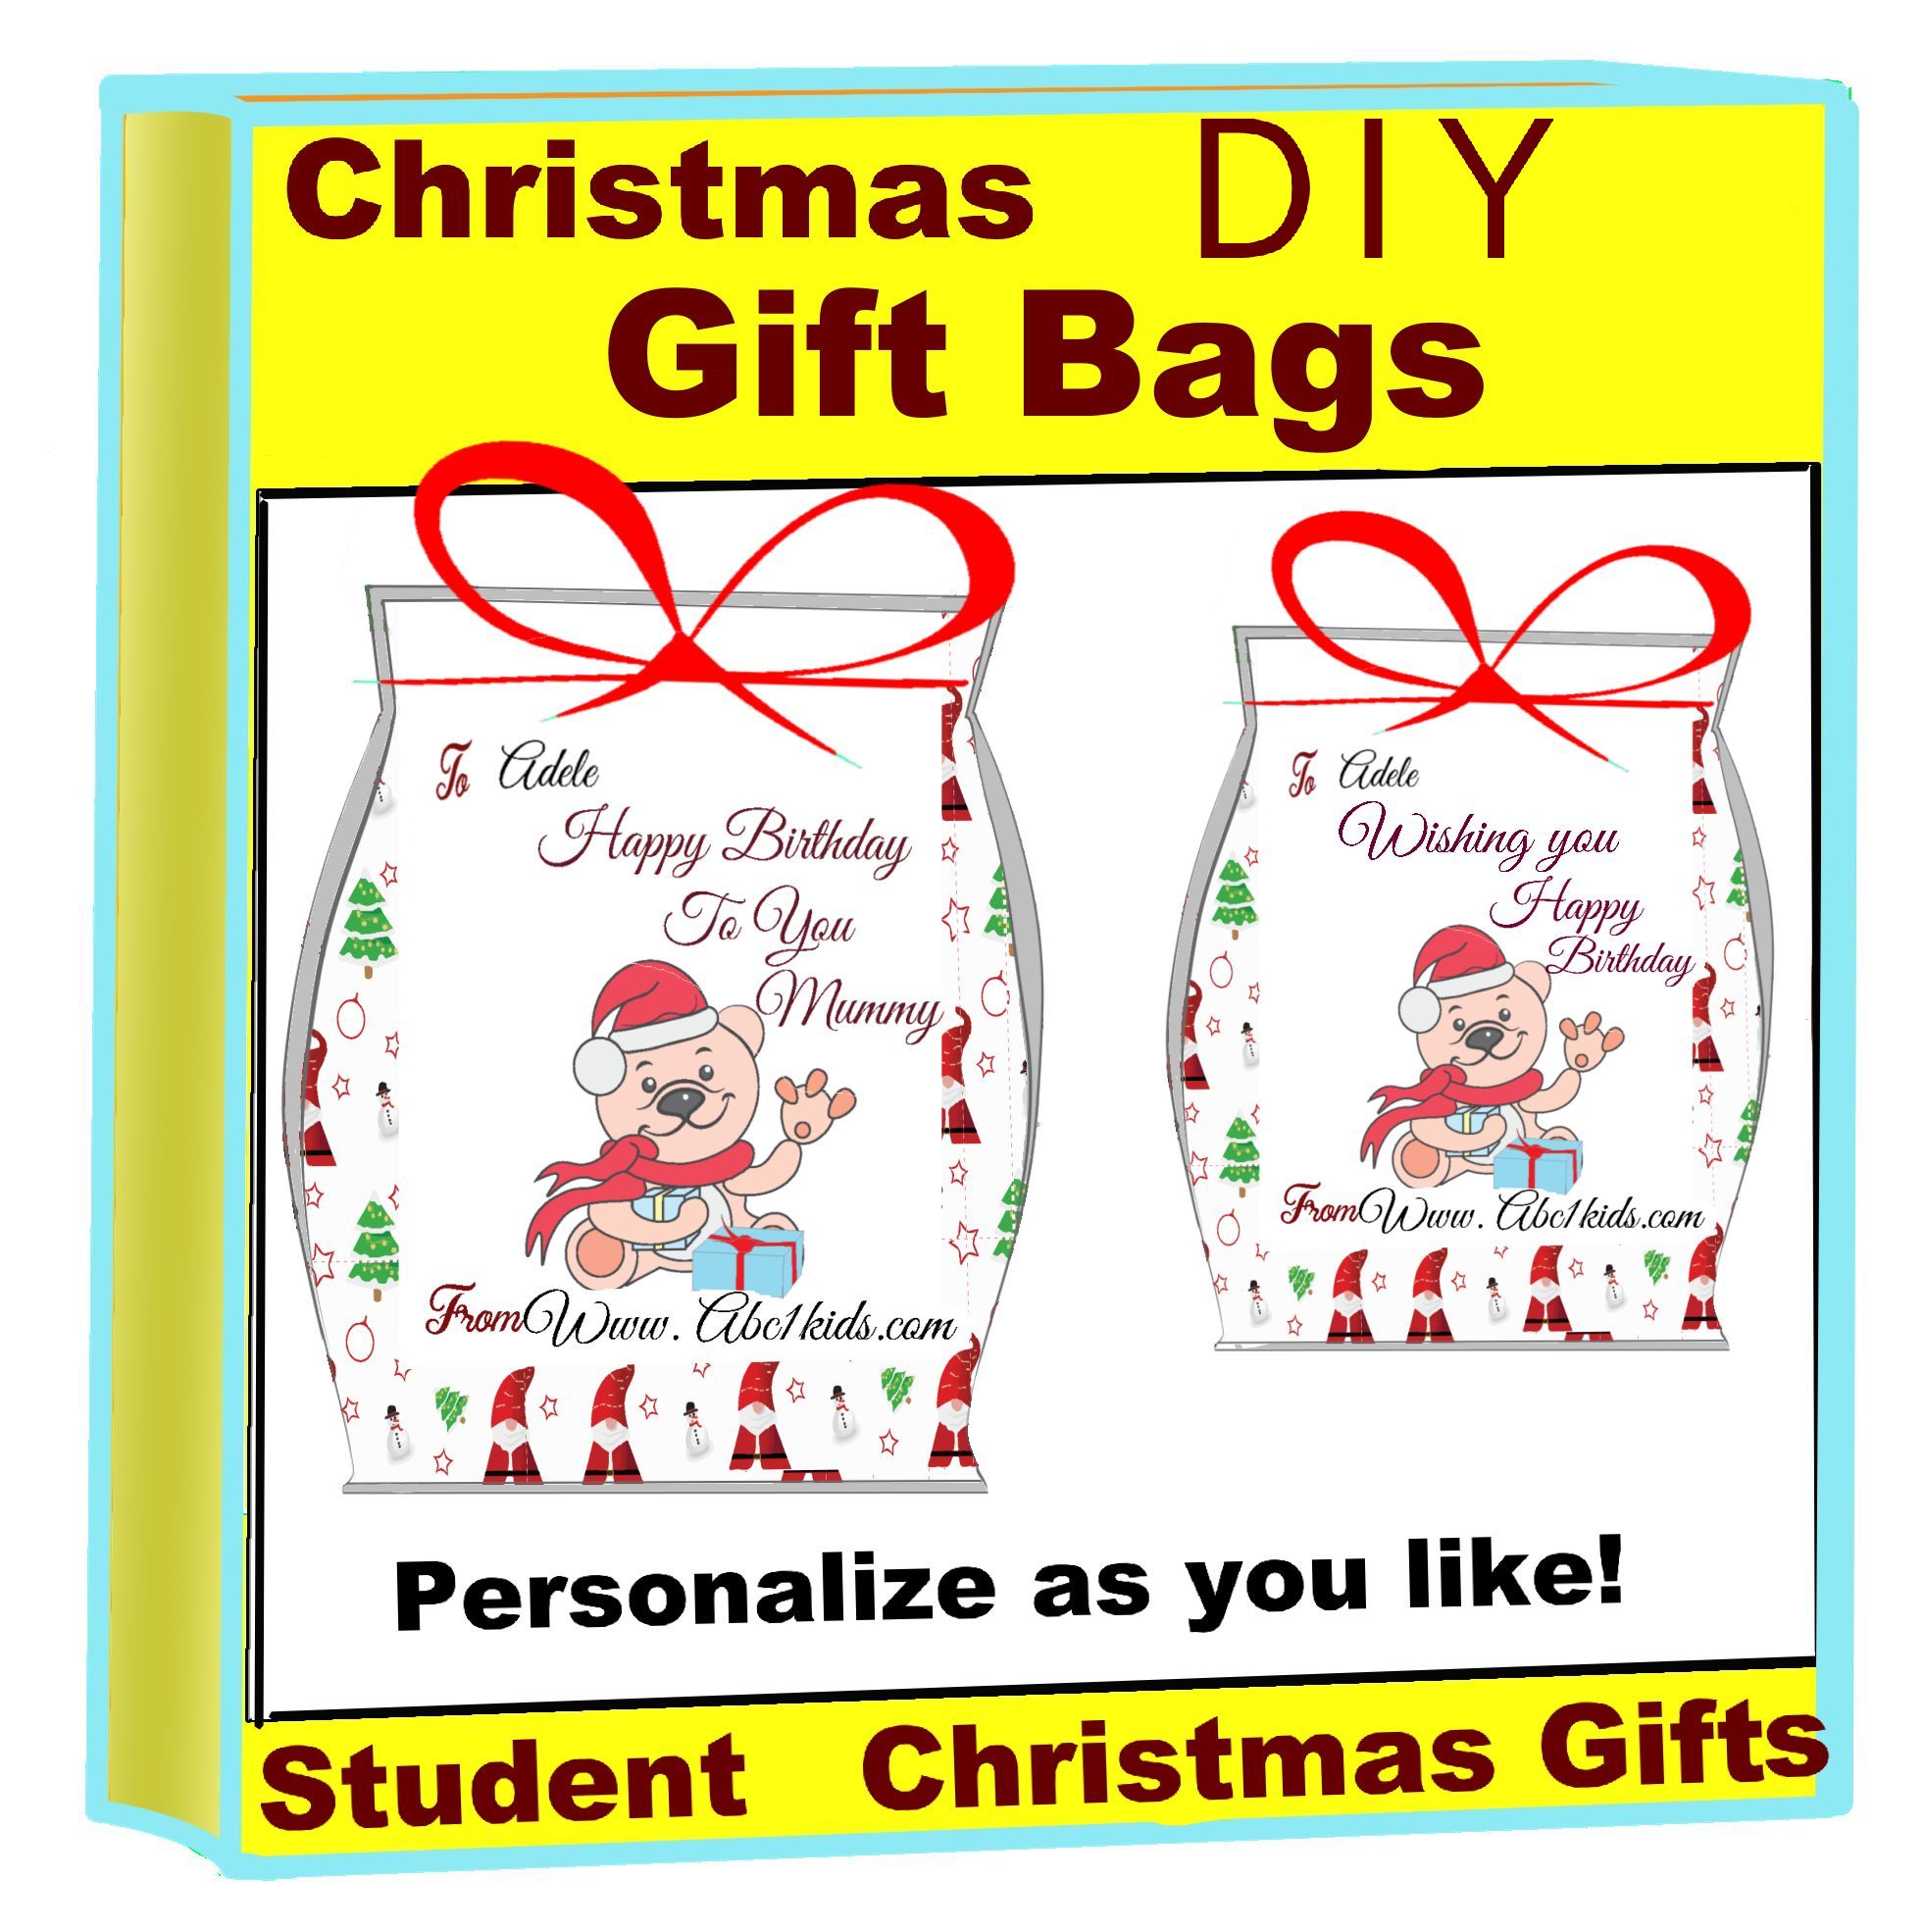 Christmas diy gift bags, personalize gift bags